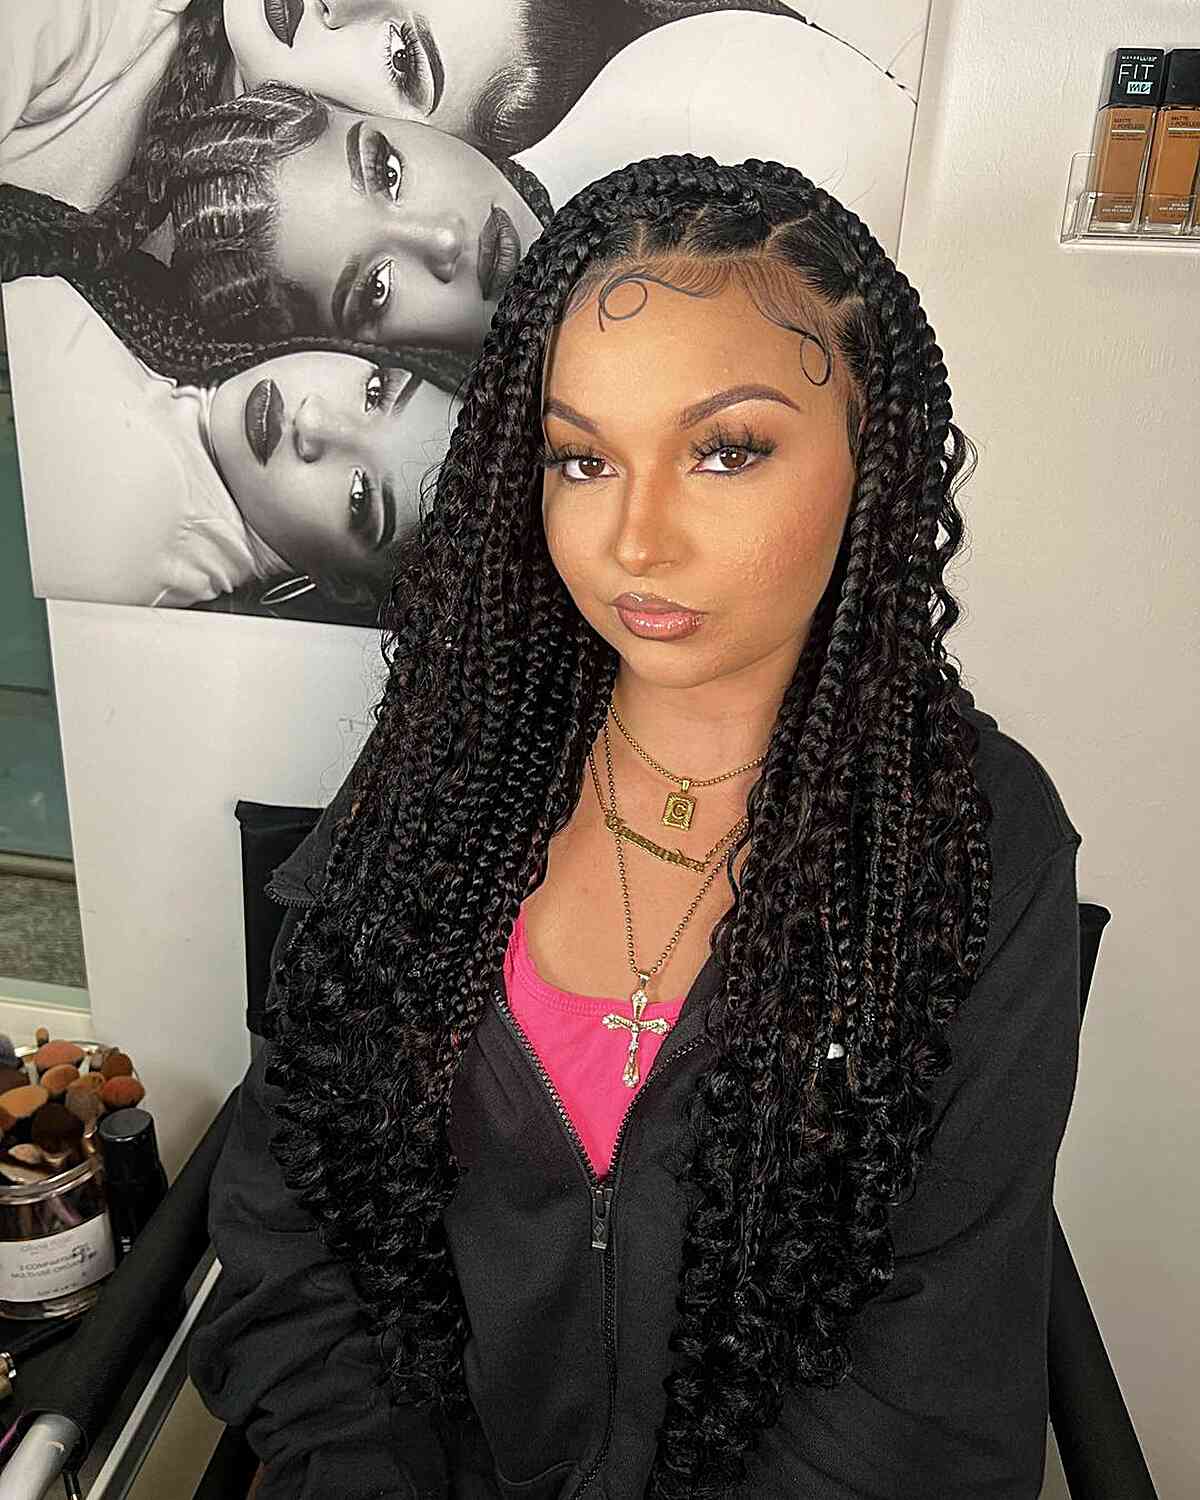 Long and Black Bohemian Knotless Braids with Swirled Edges